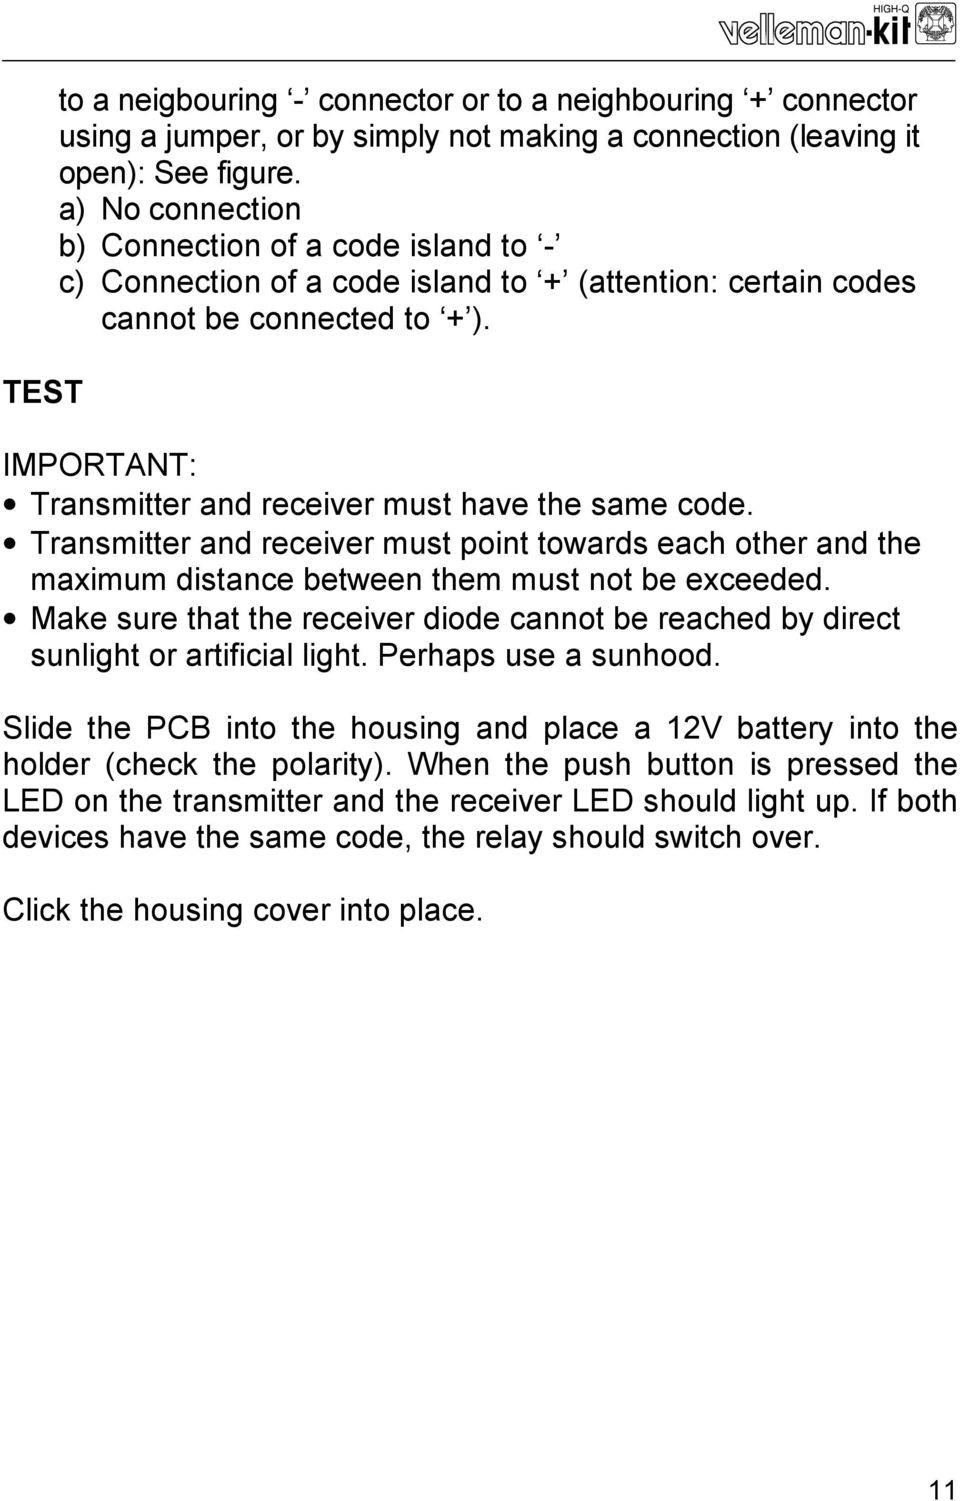 IMPORTANT: Transmitter and receiver must have the same code. Transmitter and receiver must point towards each other and the maximum distance between them must not be exceeded.